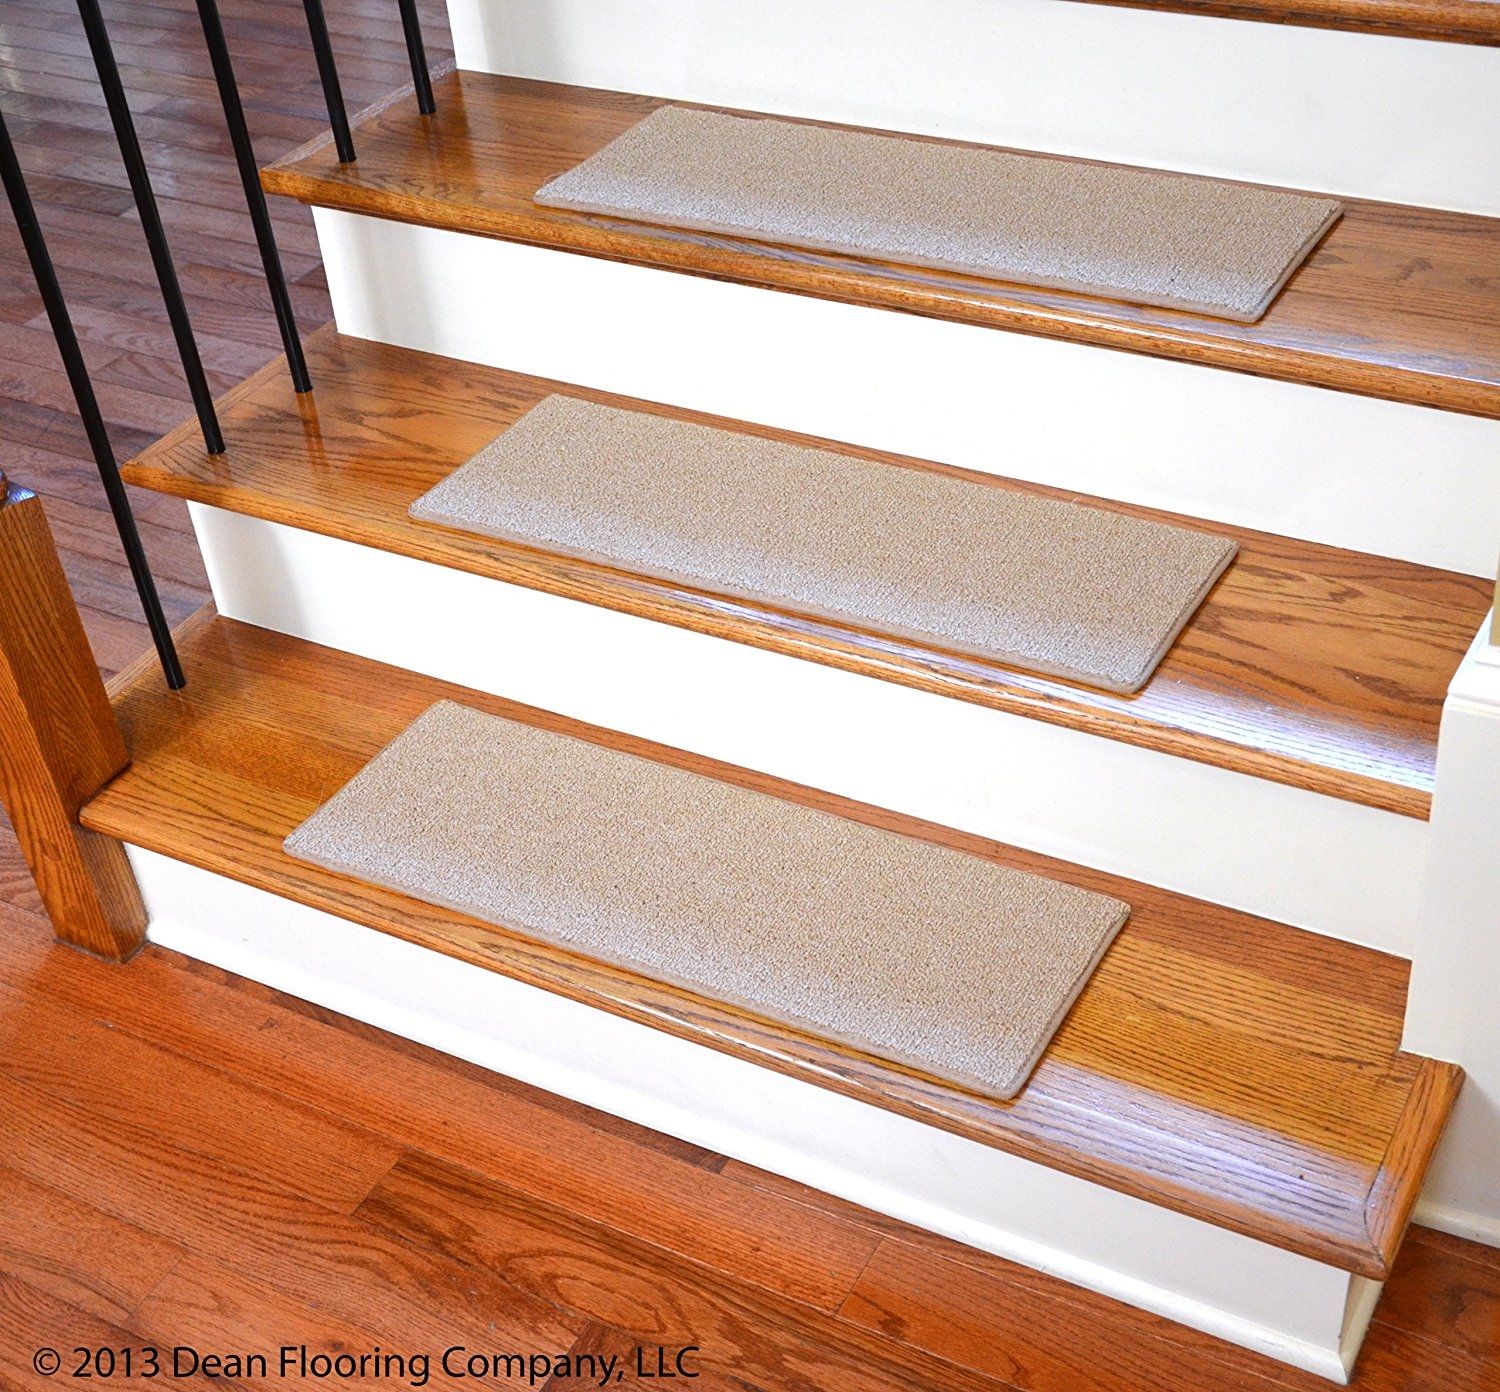 Dean Non Slip Tape Free Pet Friendly Diy Carpet Stair Treadsrugs In Removable Carpet Stair Treads 